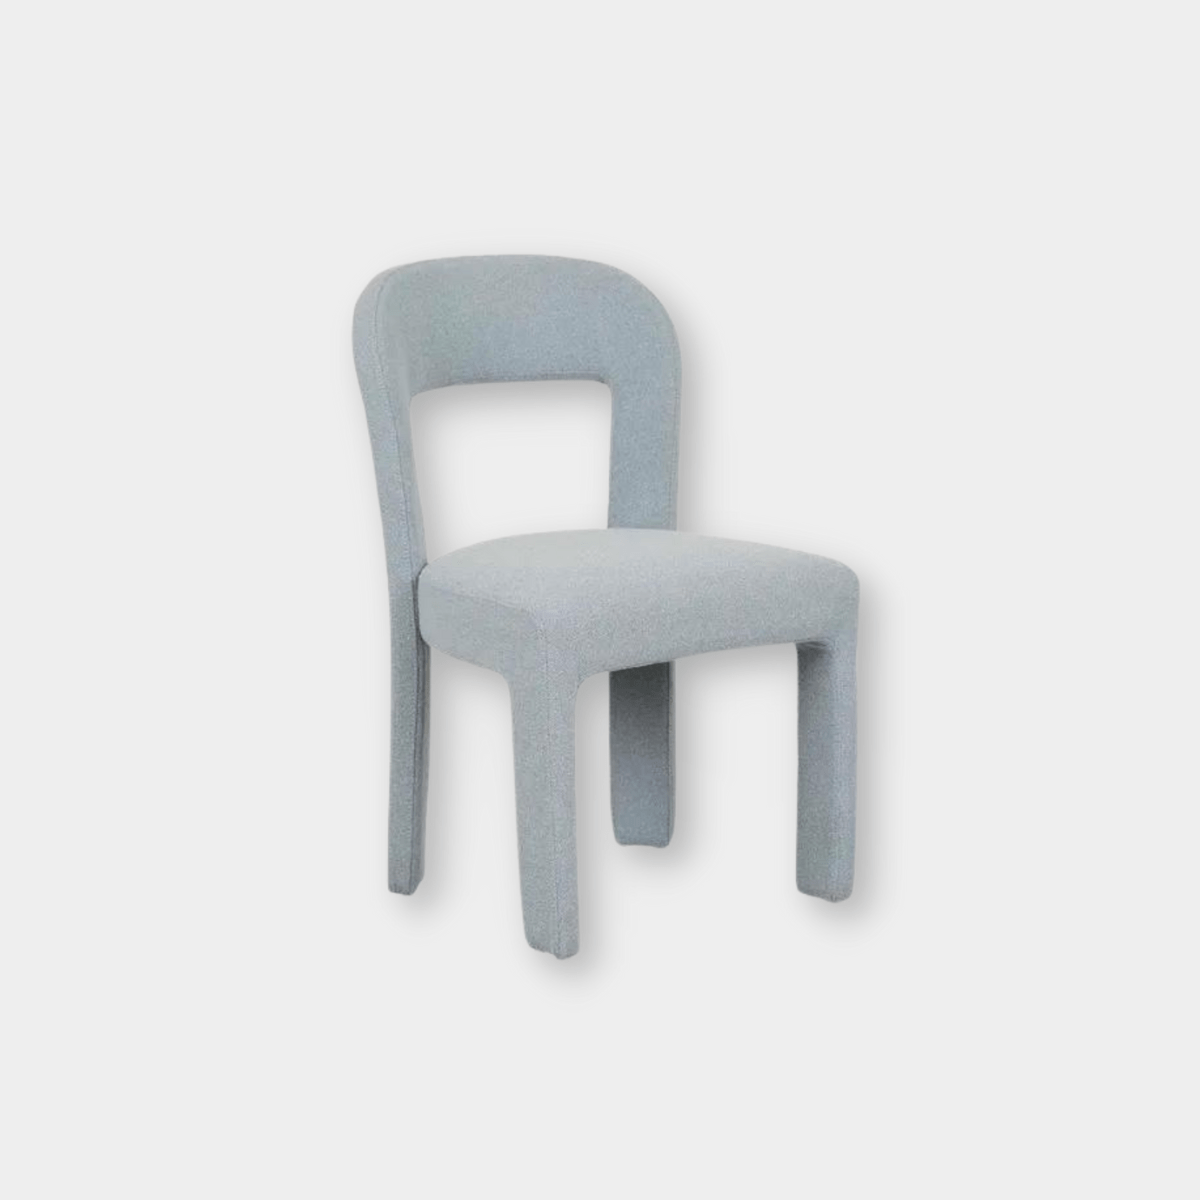 Ethnicraft Dining Chairs Ethnicraft Eleanor Dining Chair, Powder Blue (7953829101817)